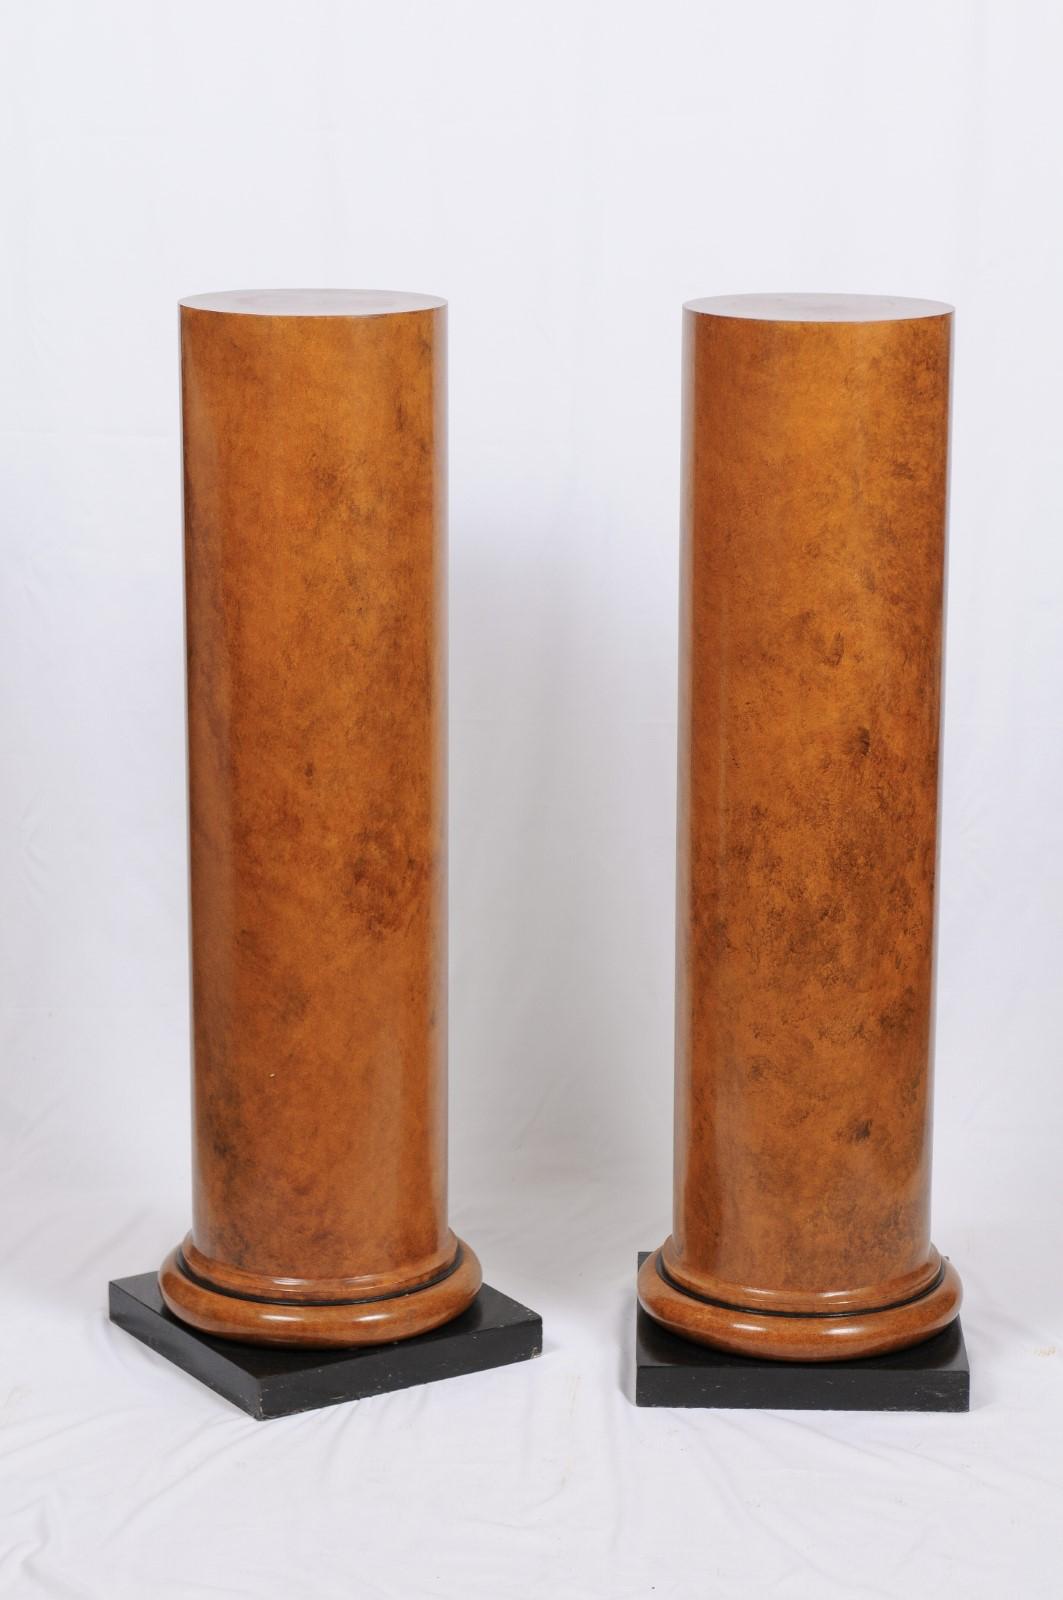 20th Century Pair of Faux Painted Art Deco Column Pedestals from the Judith Leiber Collection